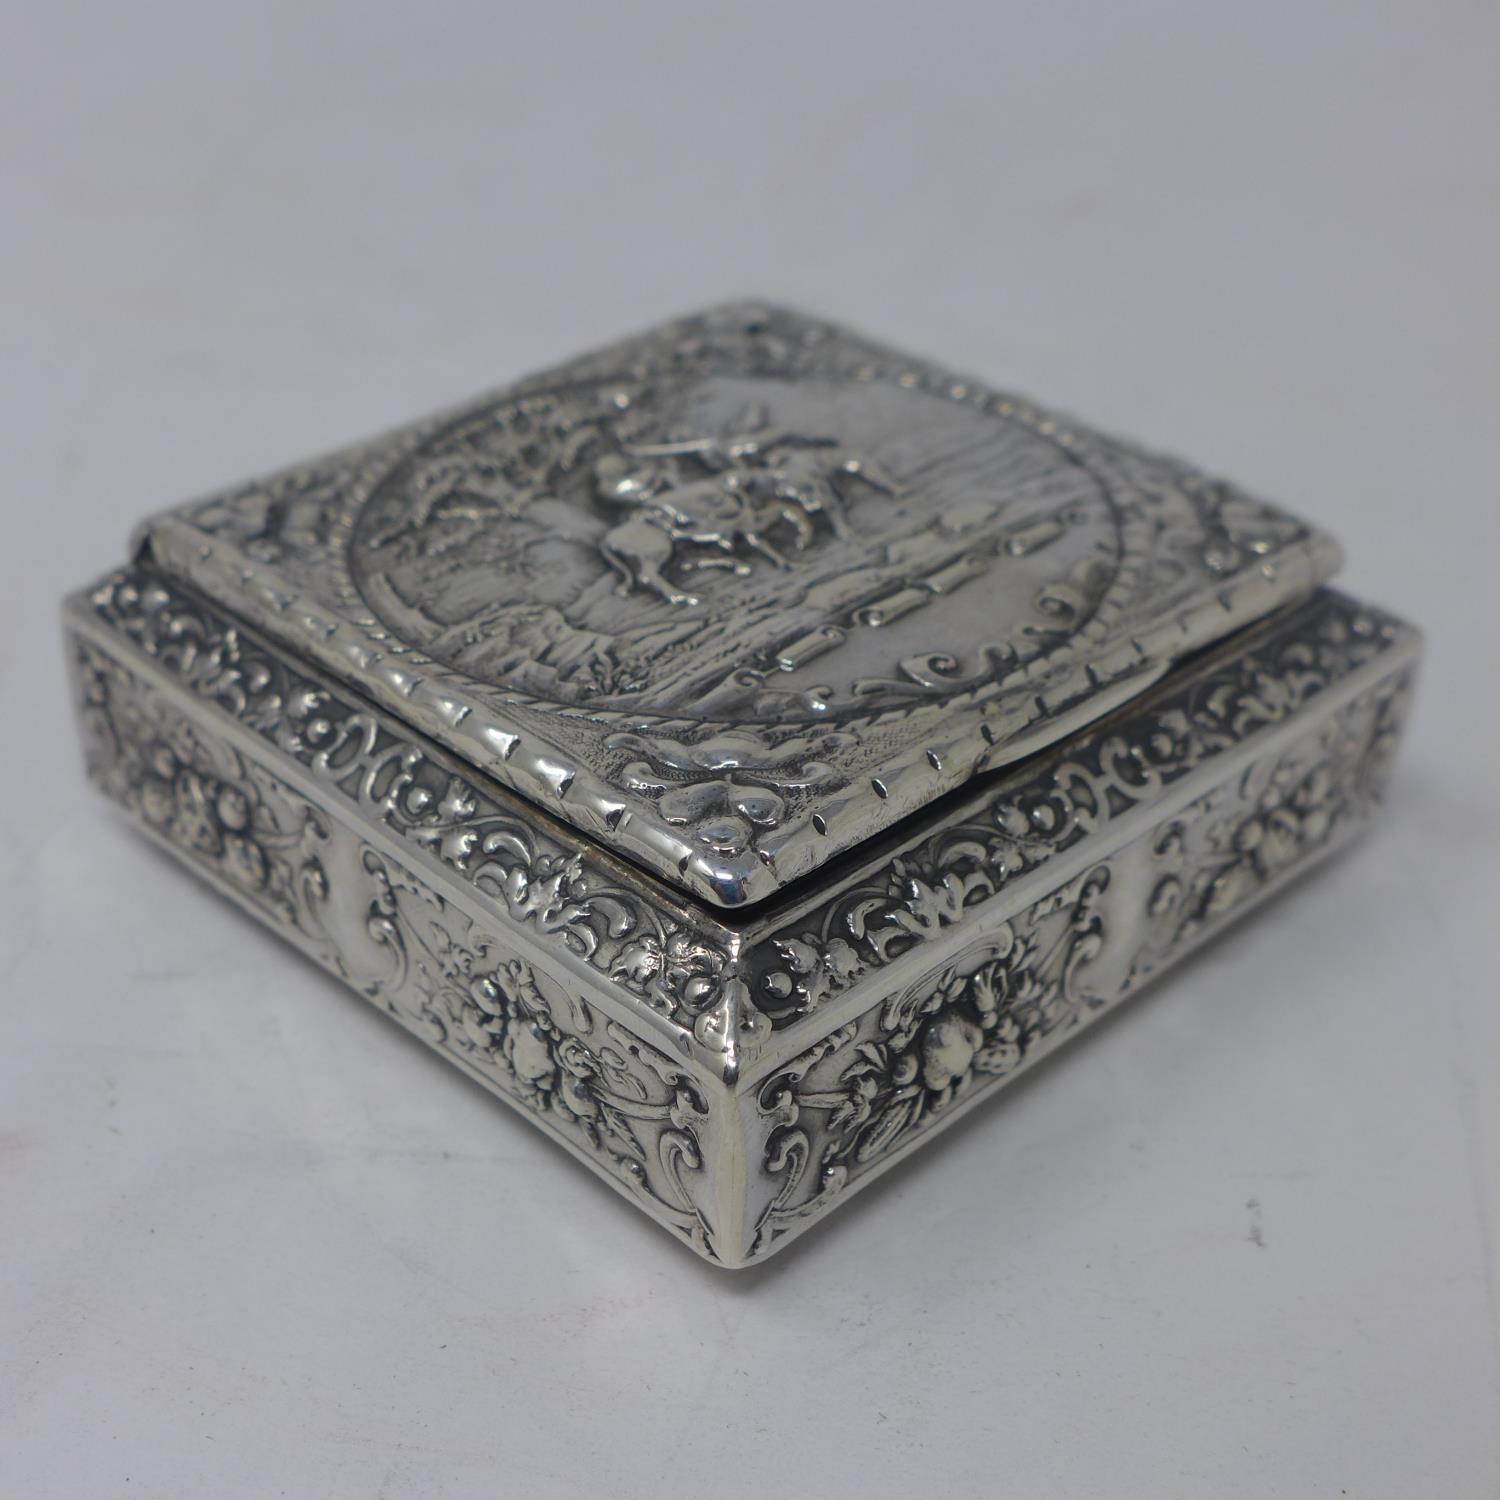 A French silver snuff box, with repousse embossed decoration with vignette of scene from Exodus of